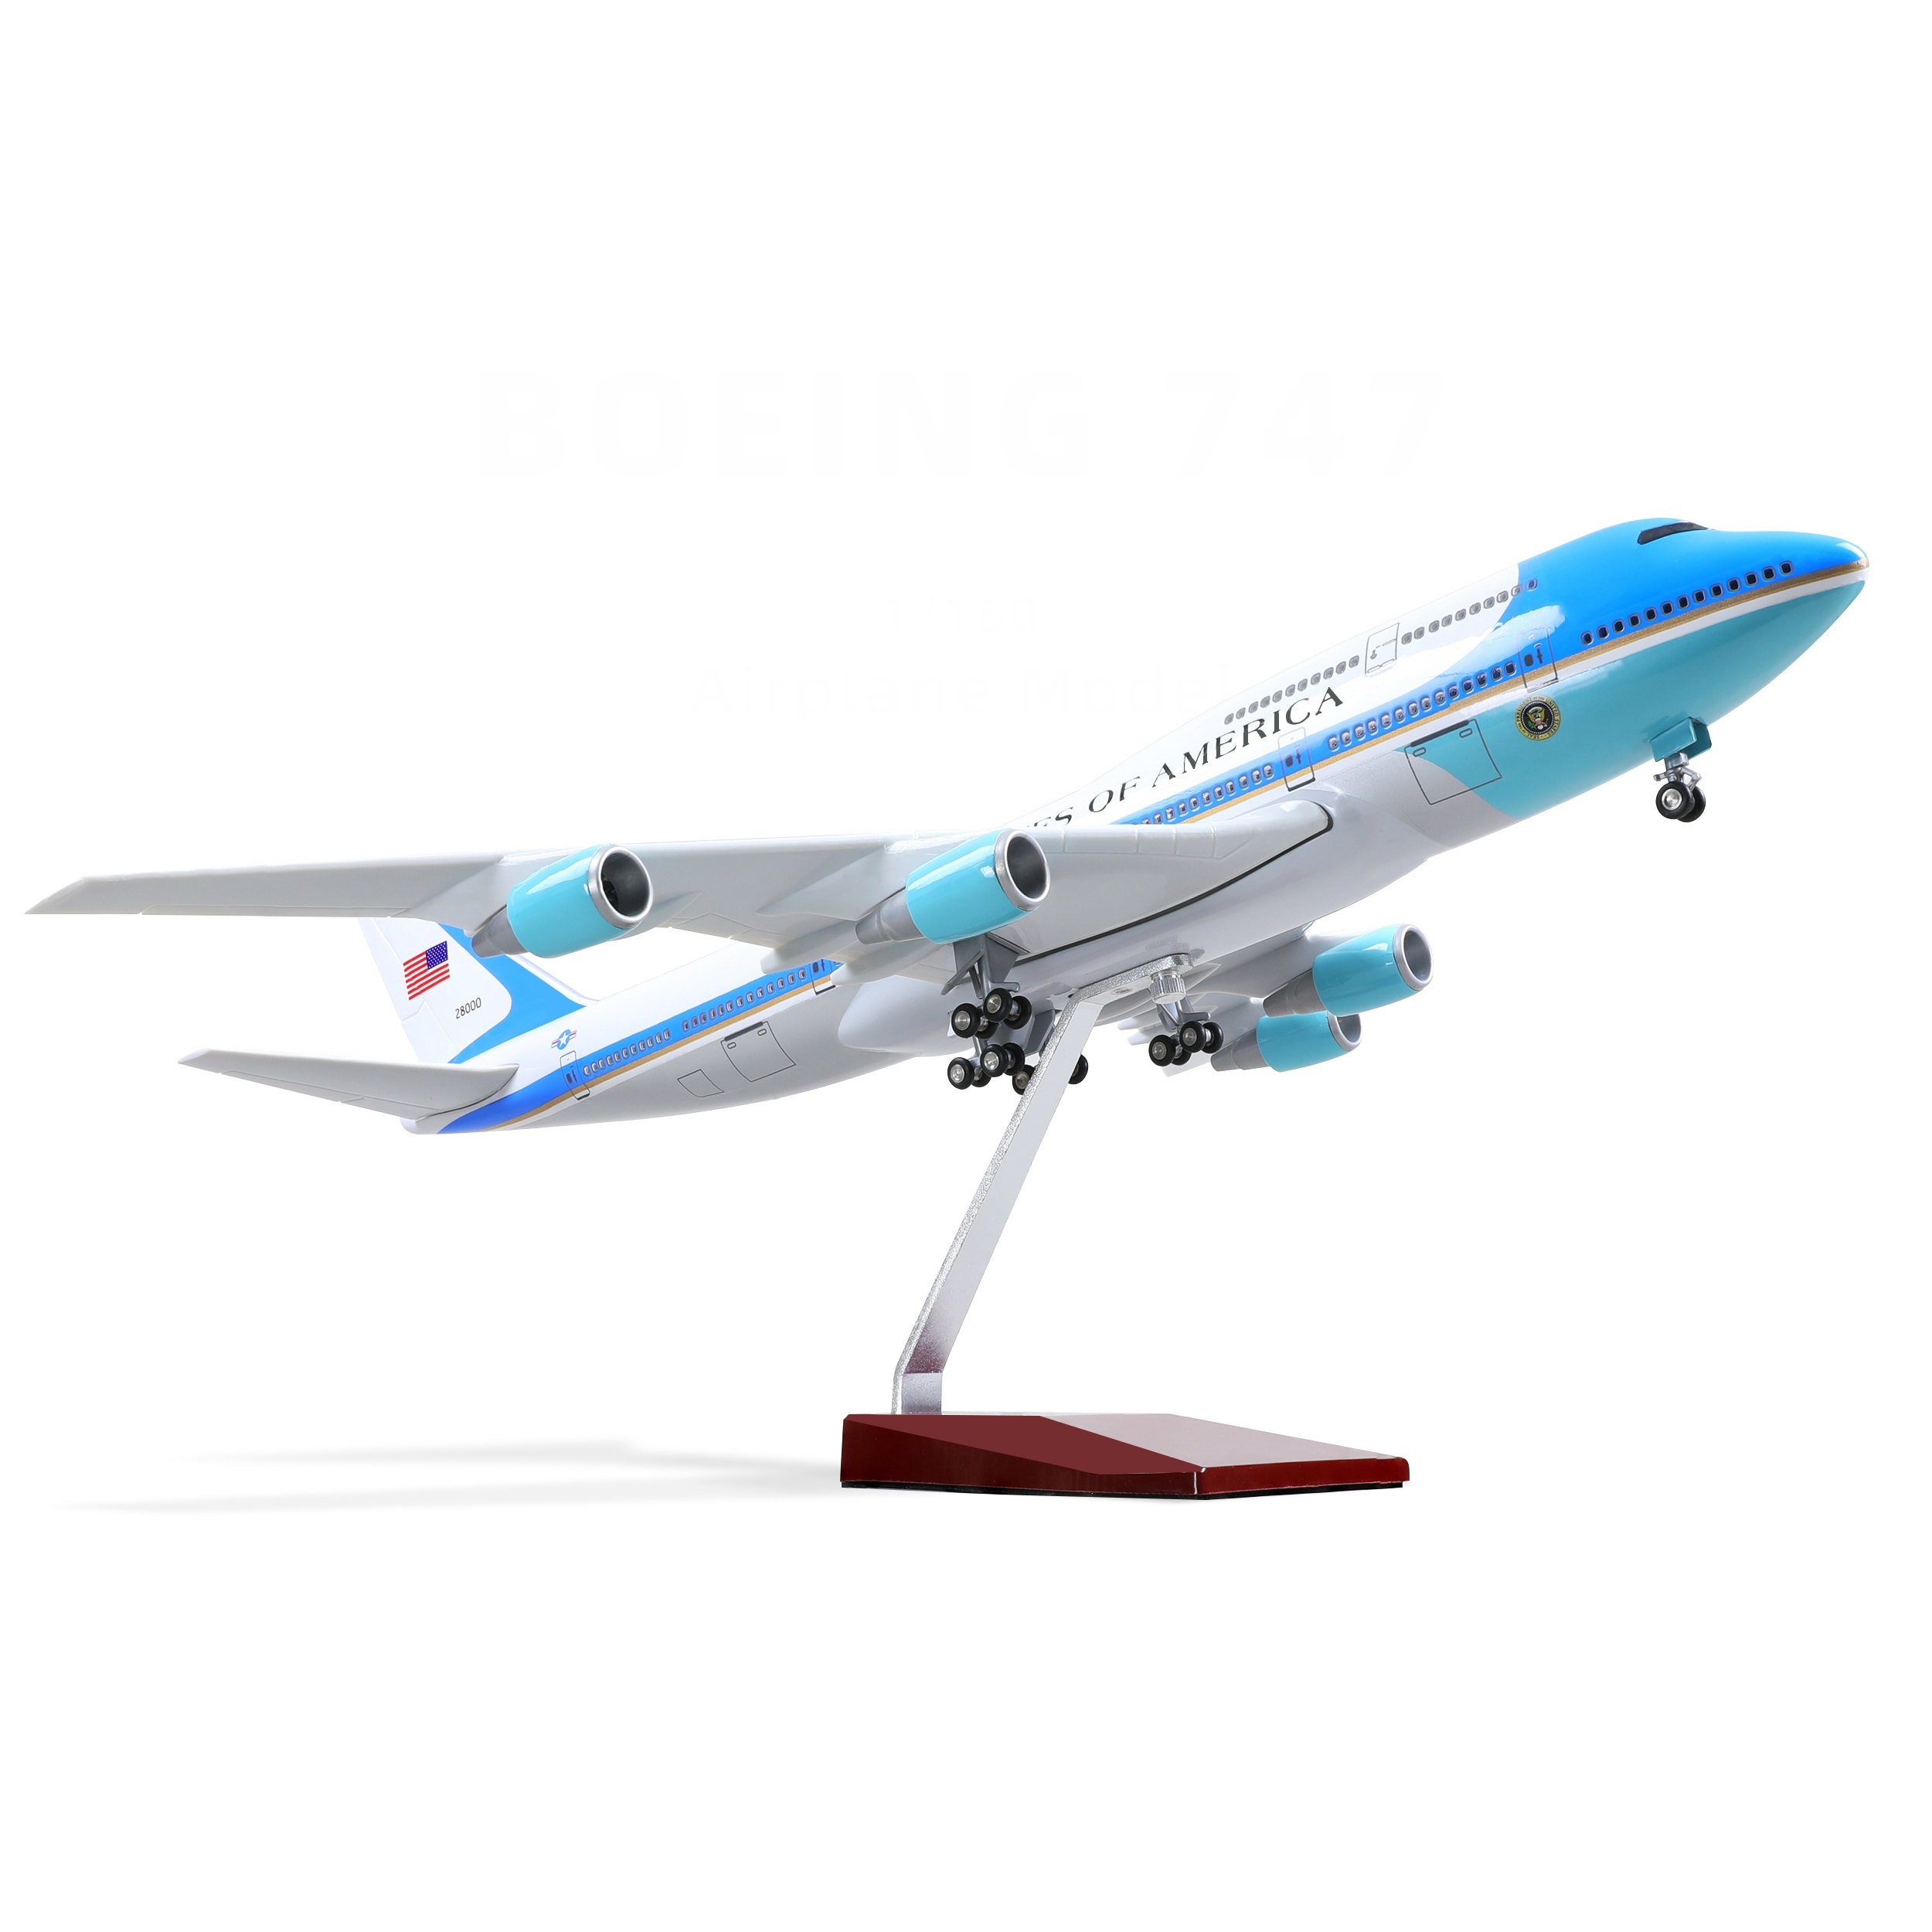 

1:160 Scale Boeing 747-200b Vc-25a 17 In Large Model Diecast Airplane Model Kits With Stand Airlines Model Plane Display Collectible For Adult